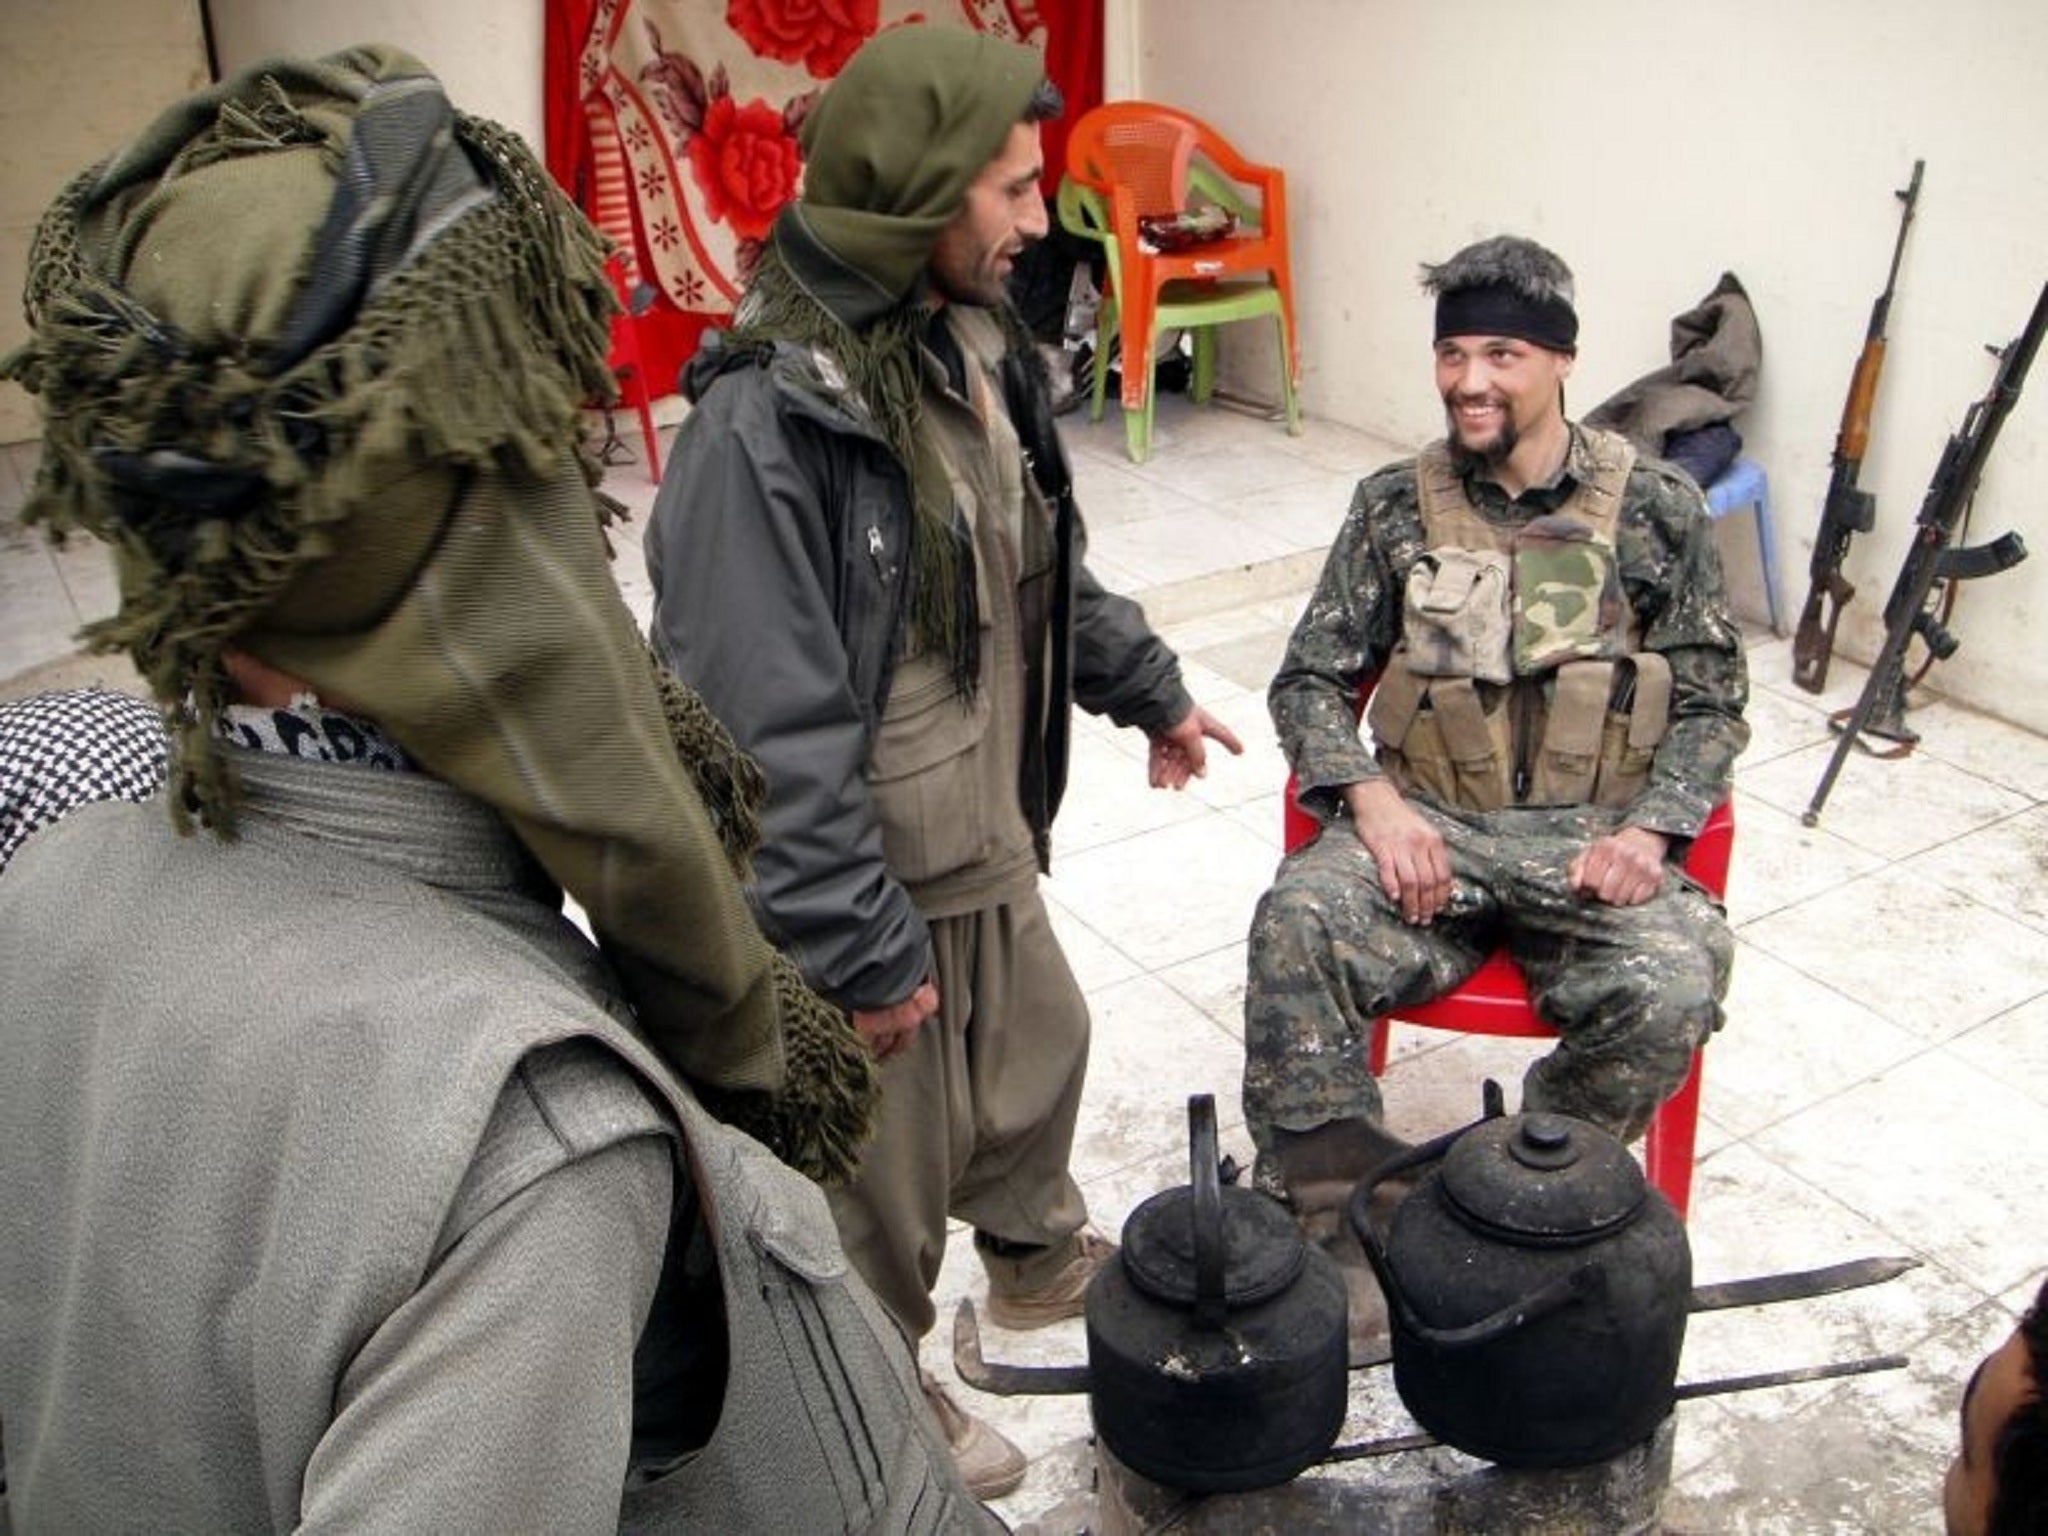 Former US soldier Jordan Matson, right, with Kurdish fighters surrounded by machine guns